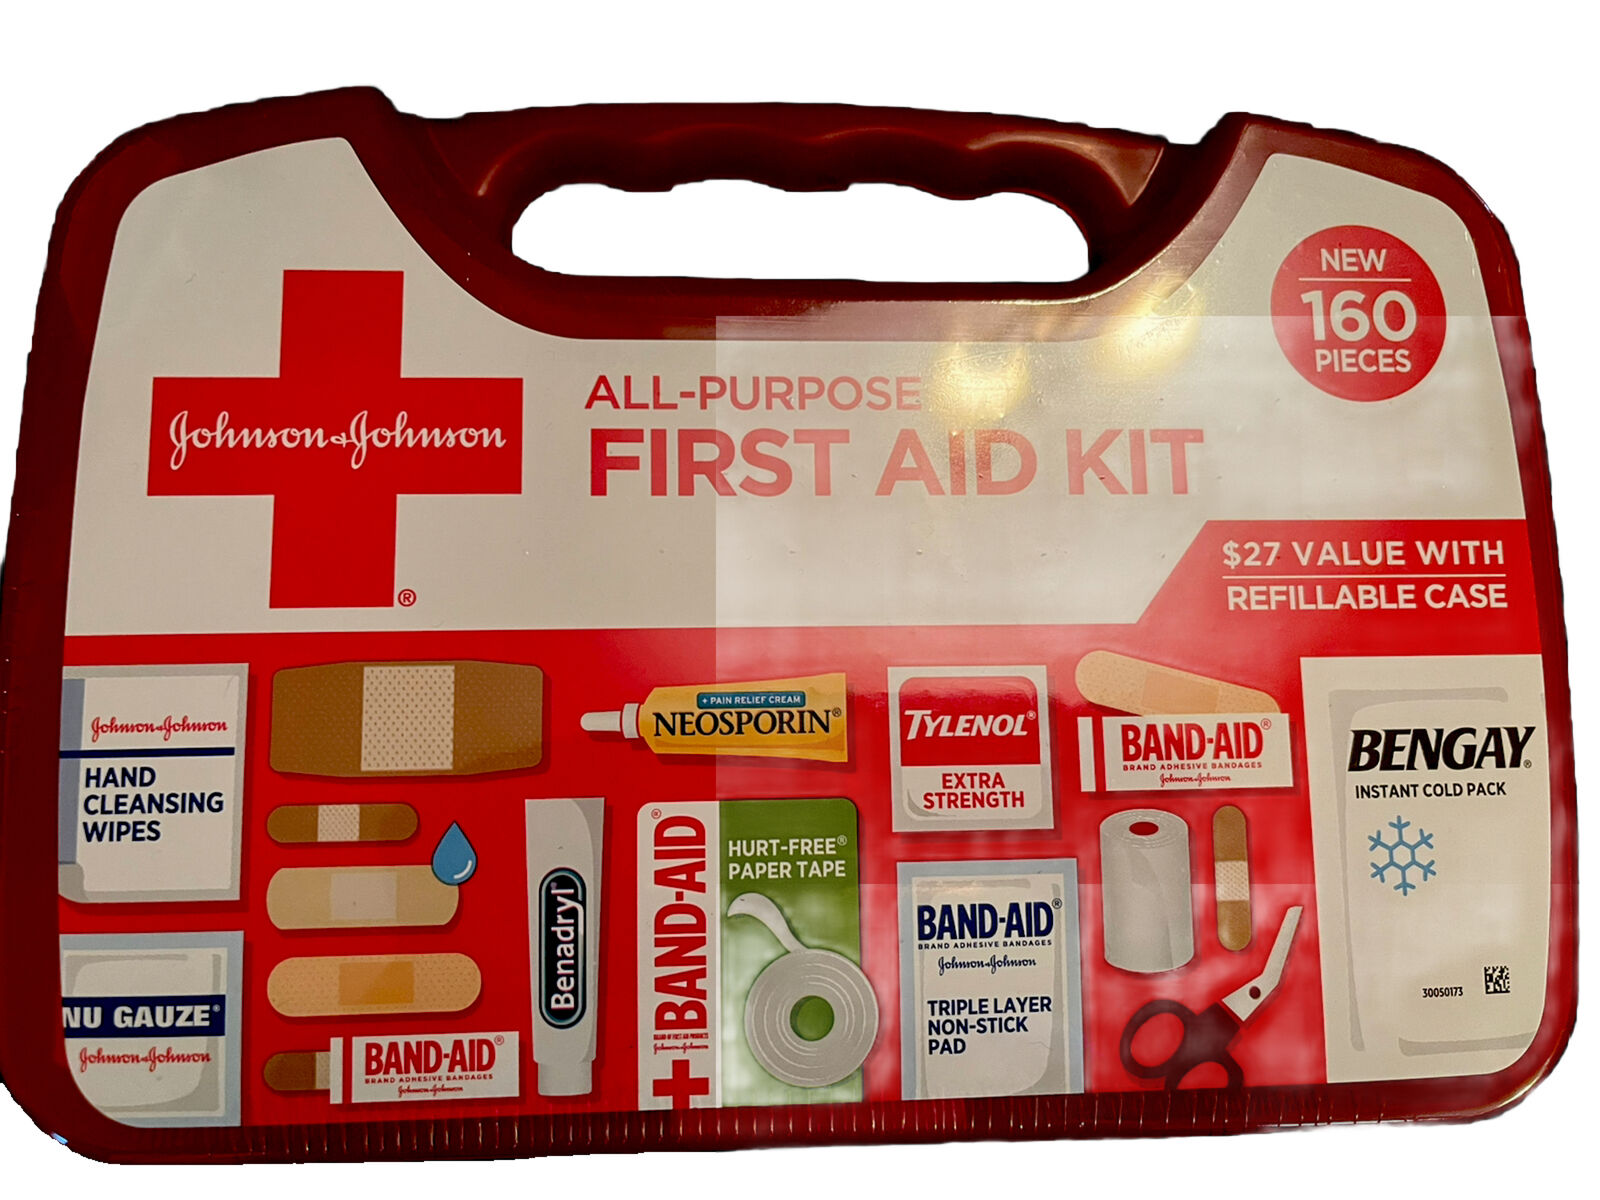 25-First Aid Kits - 160 piece All-Purpose by Johnson & Johnson - New sealed box